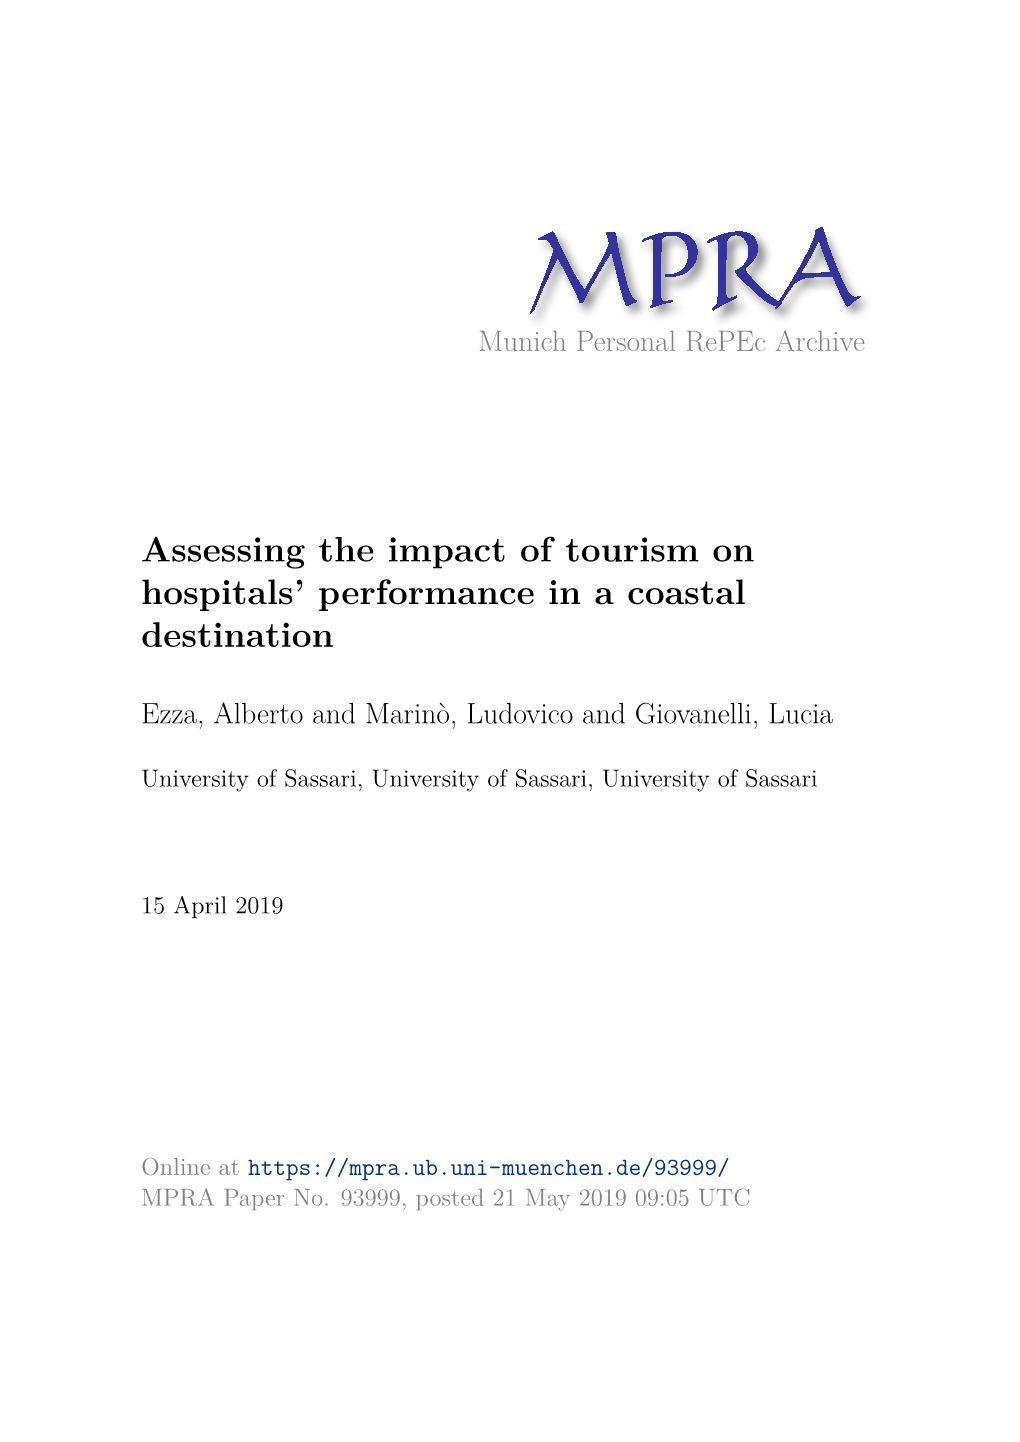 Assessing the Impact of Tourism on Hospitals' Performance in a Coastal